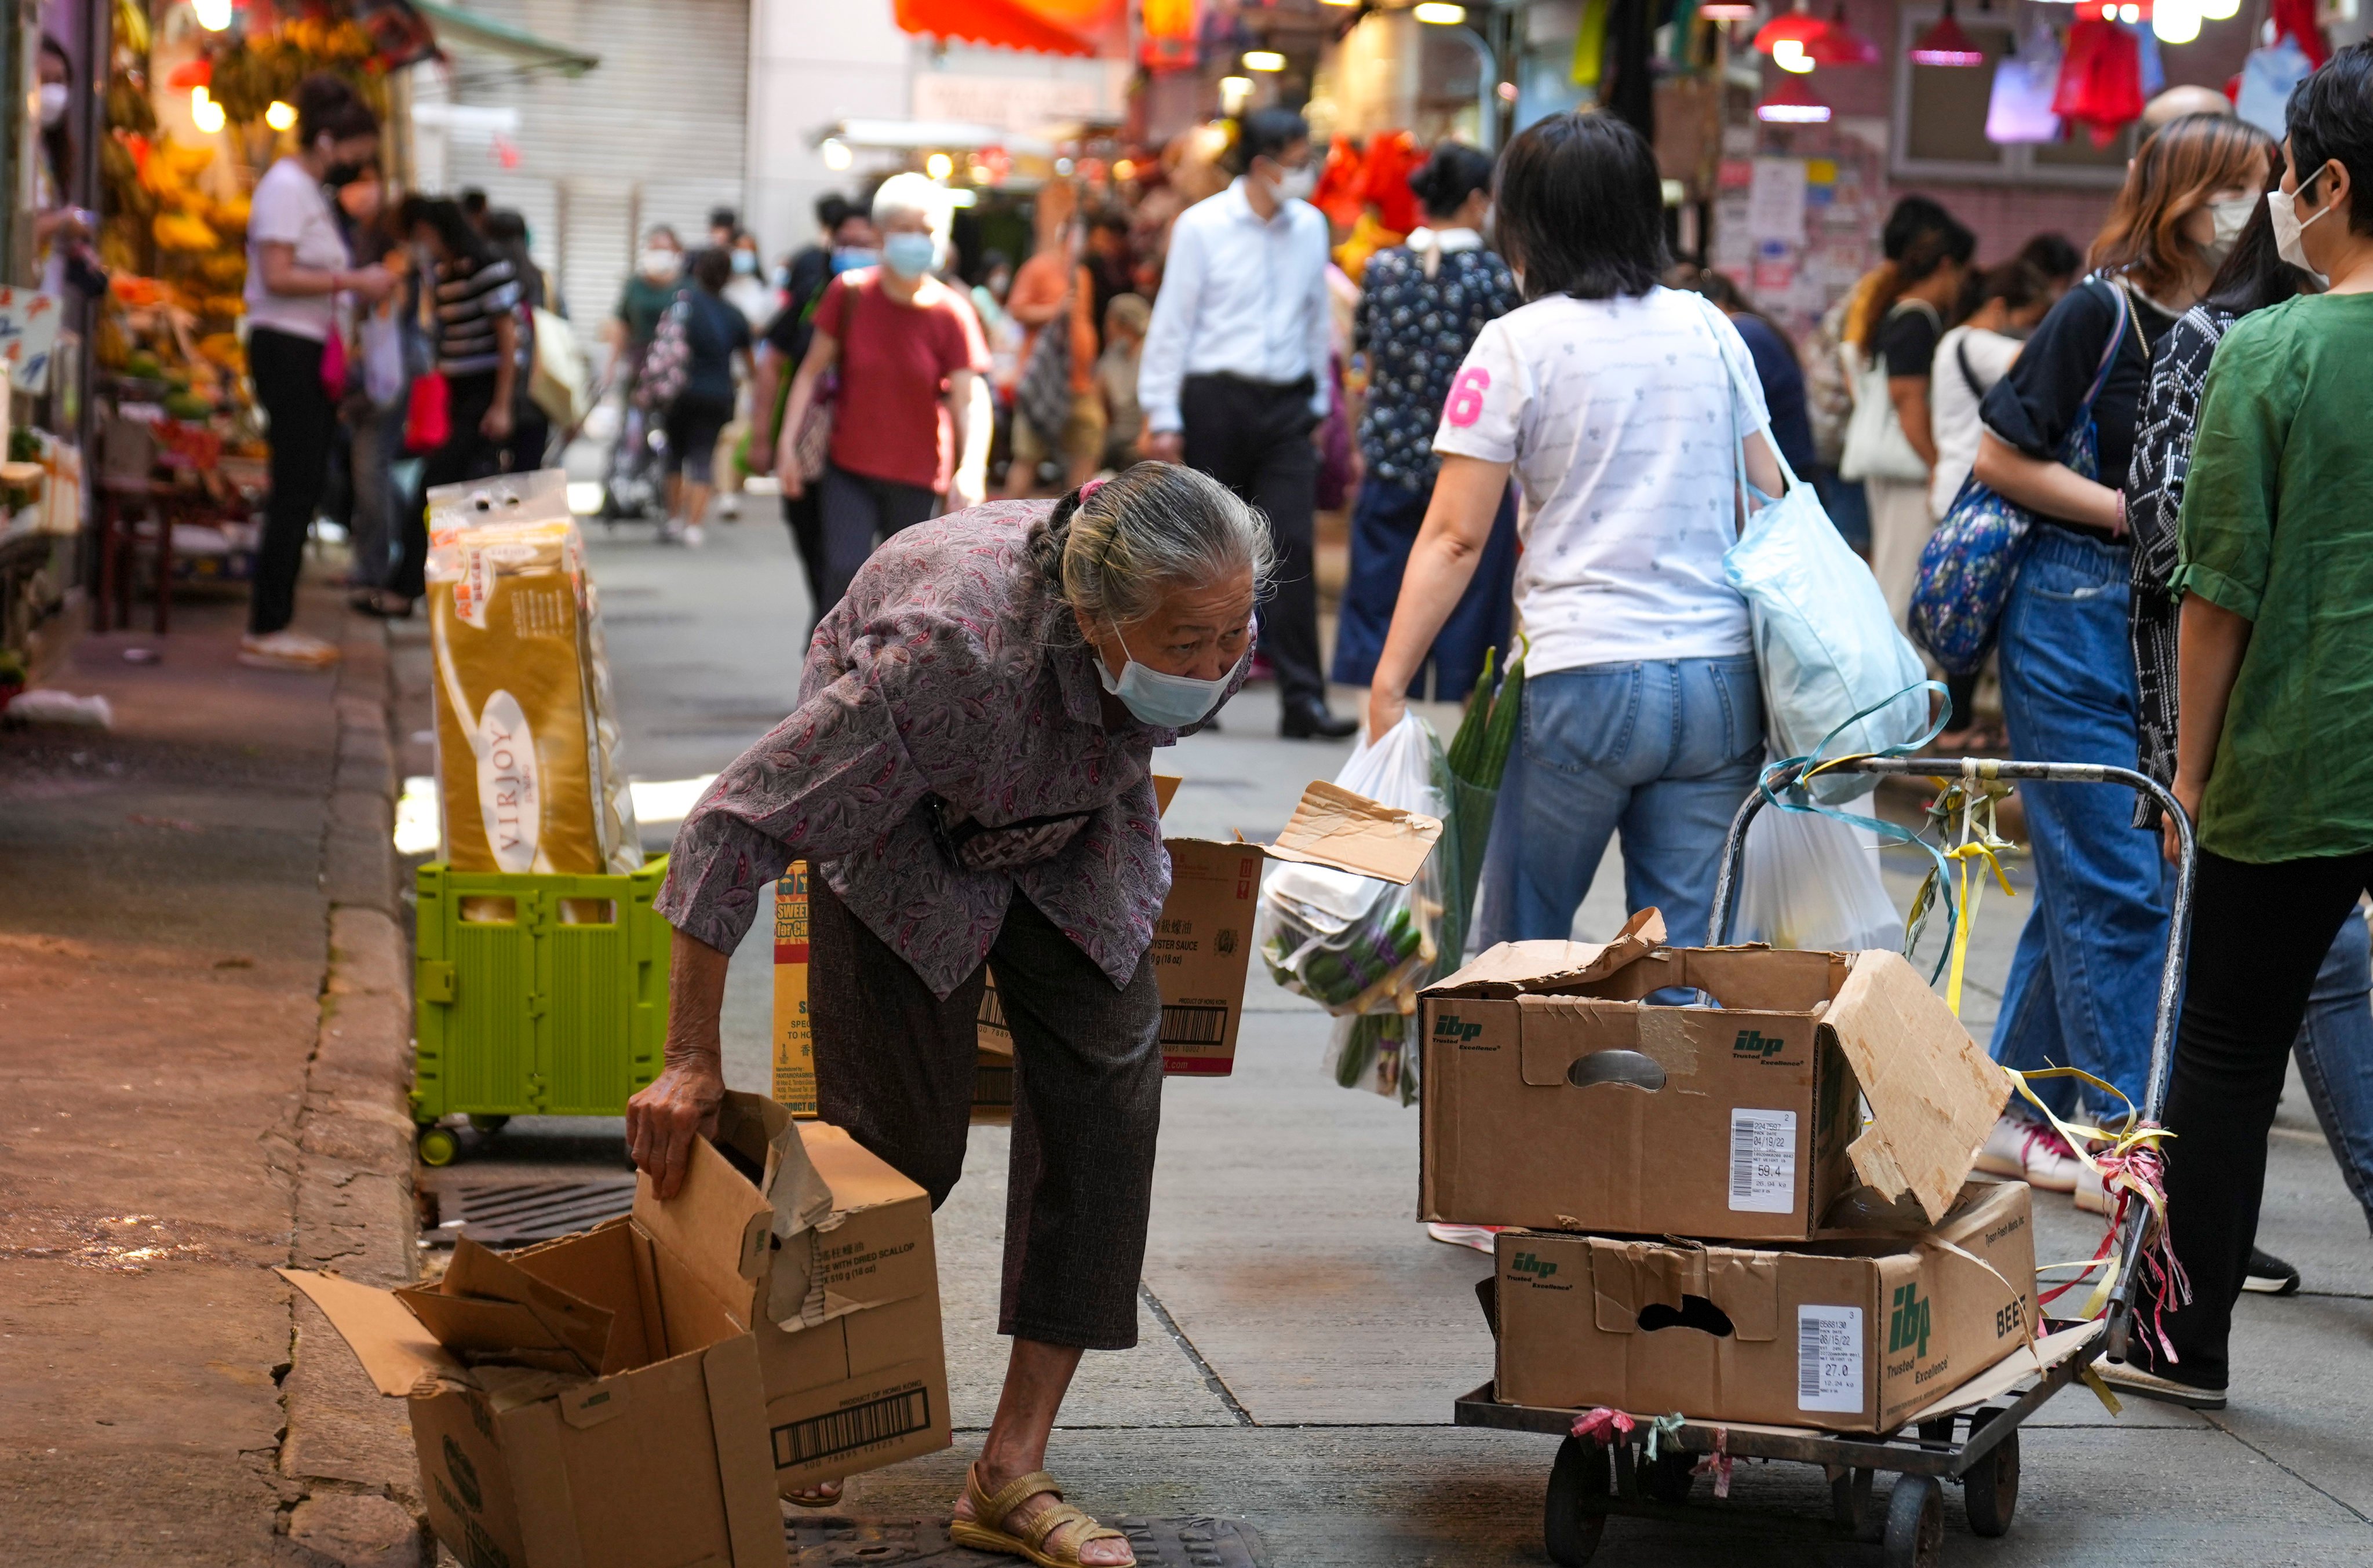 The gap between Hong Kong’s richest and poorest households has widened stratospherically since 2019. Photo: Sam Tsang